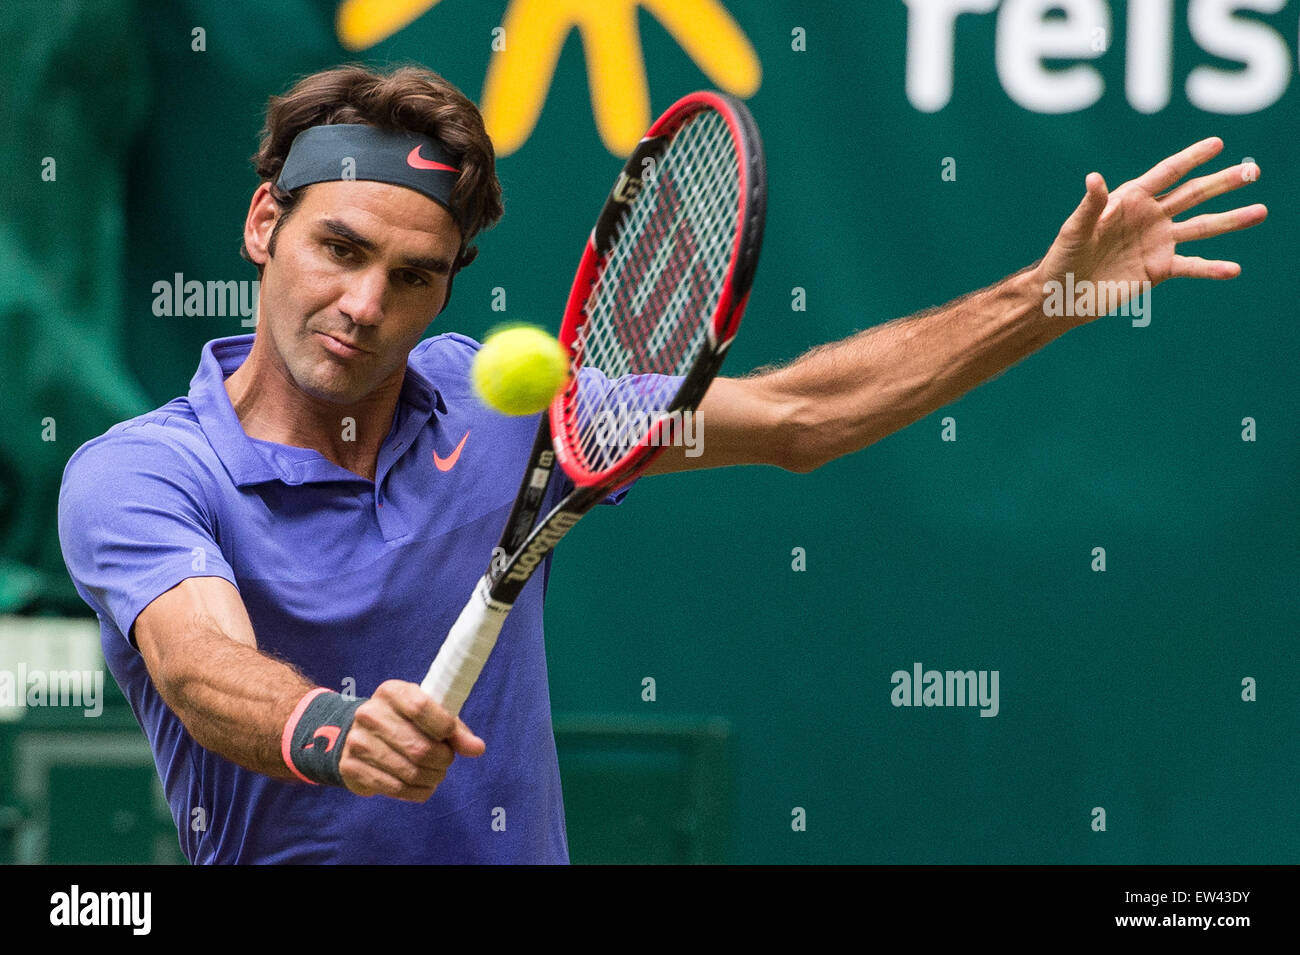 Halle, Germany. 17th June, 2015. Roger Federer of Switzerland in action  during the round of 16 match against Gulbis of Latvia at the ATP tennis  tournament in Halle, Germany, 17 June 2015.